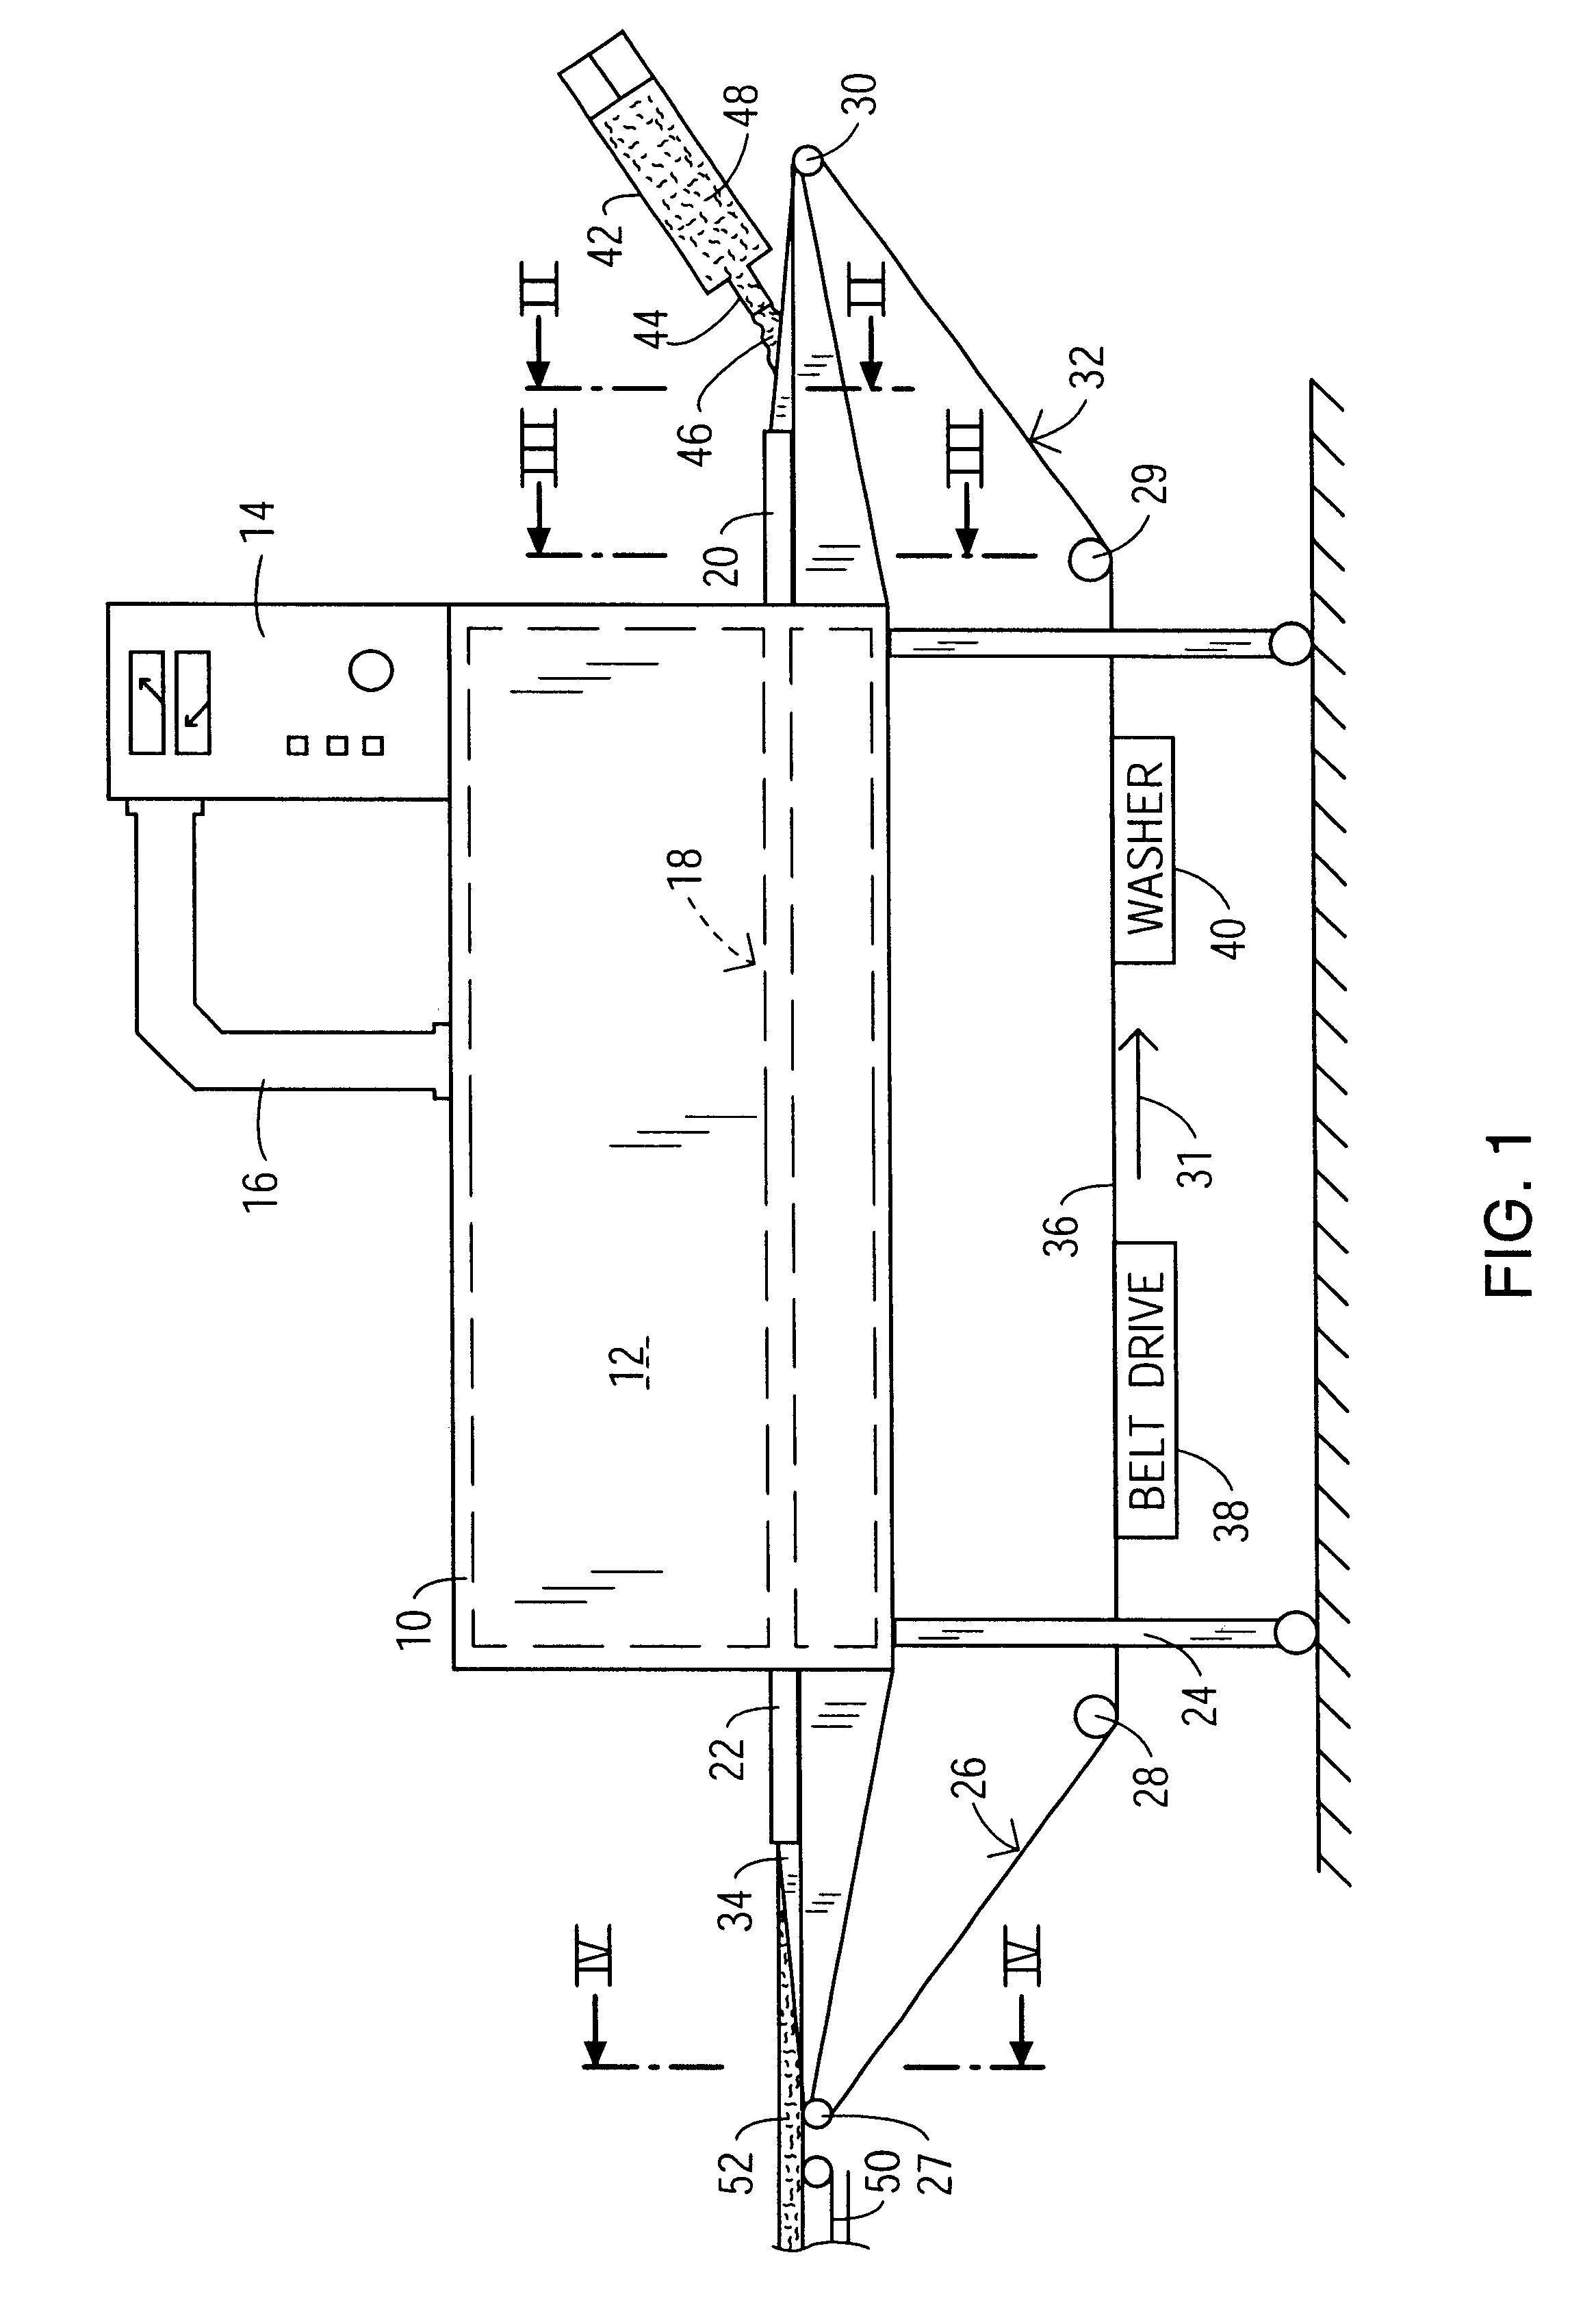 Skinless sausage or frankfurter manufacturing method and apparatus utilizing reusable deformable support